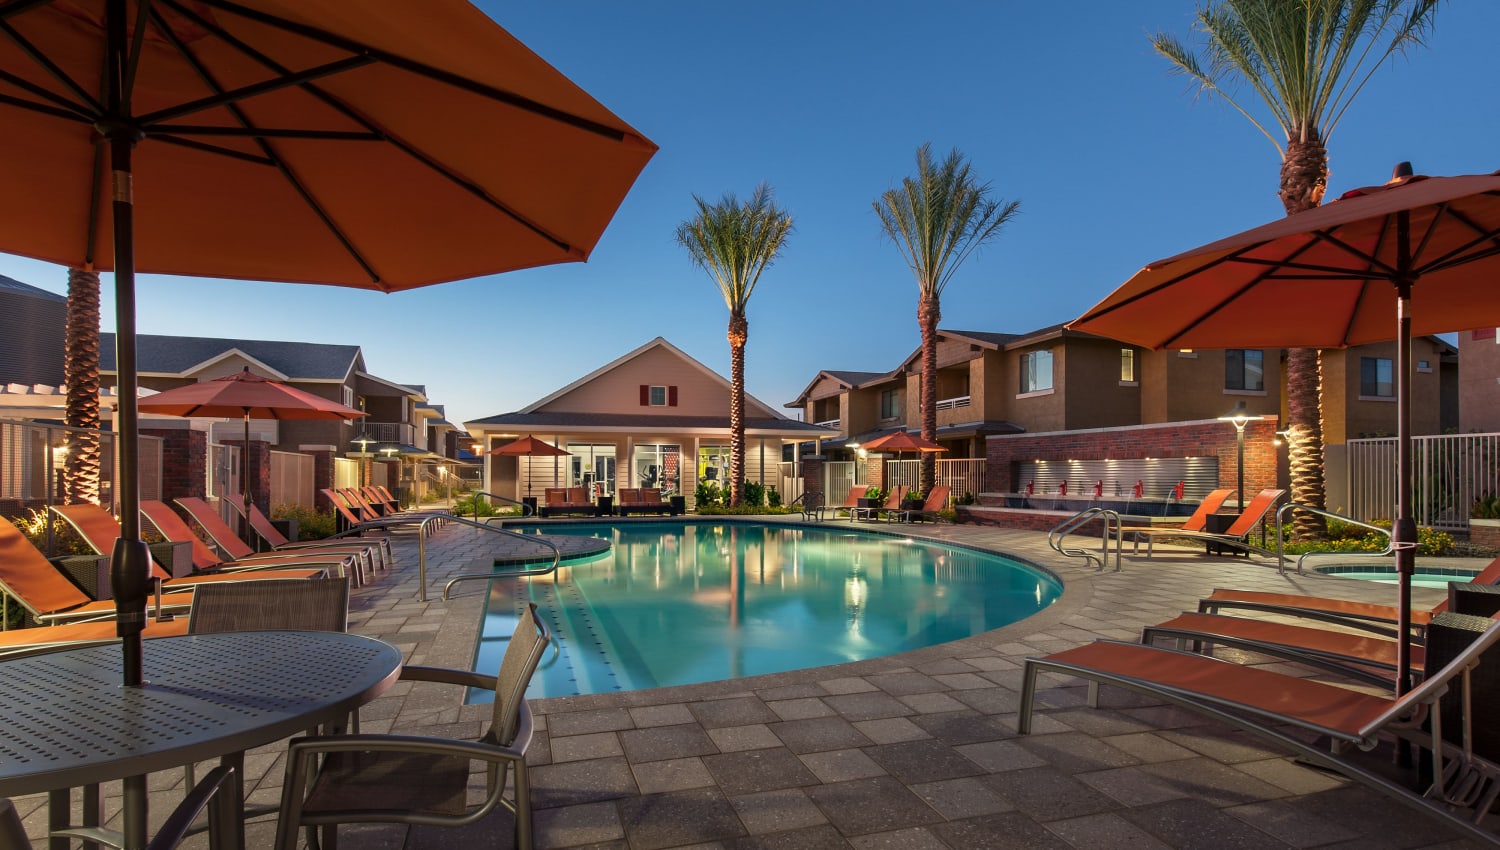 Sparkling pool and poolside seating at Highland Groves at Morrison Ranch Apartments in Gilbert, Arizona